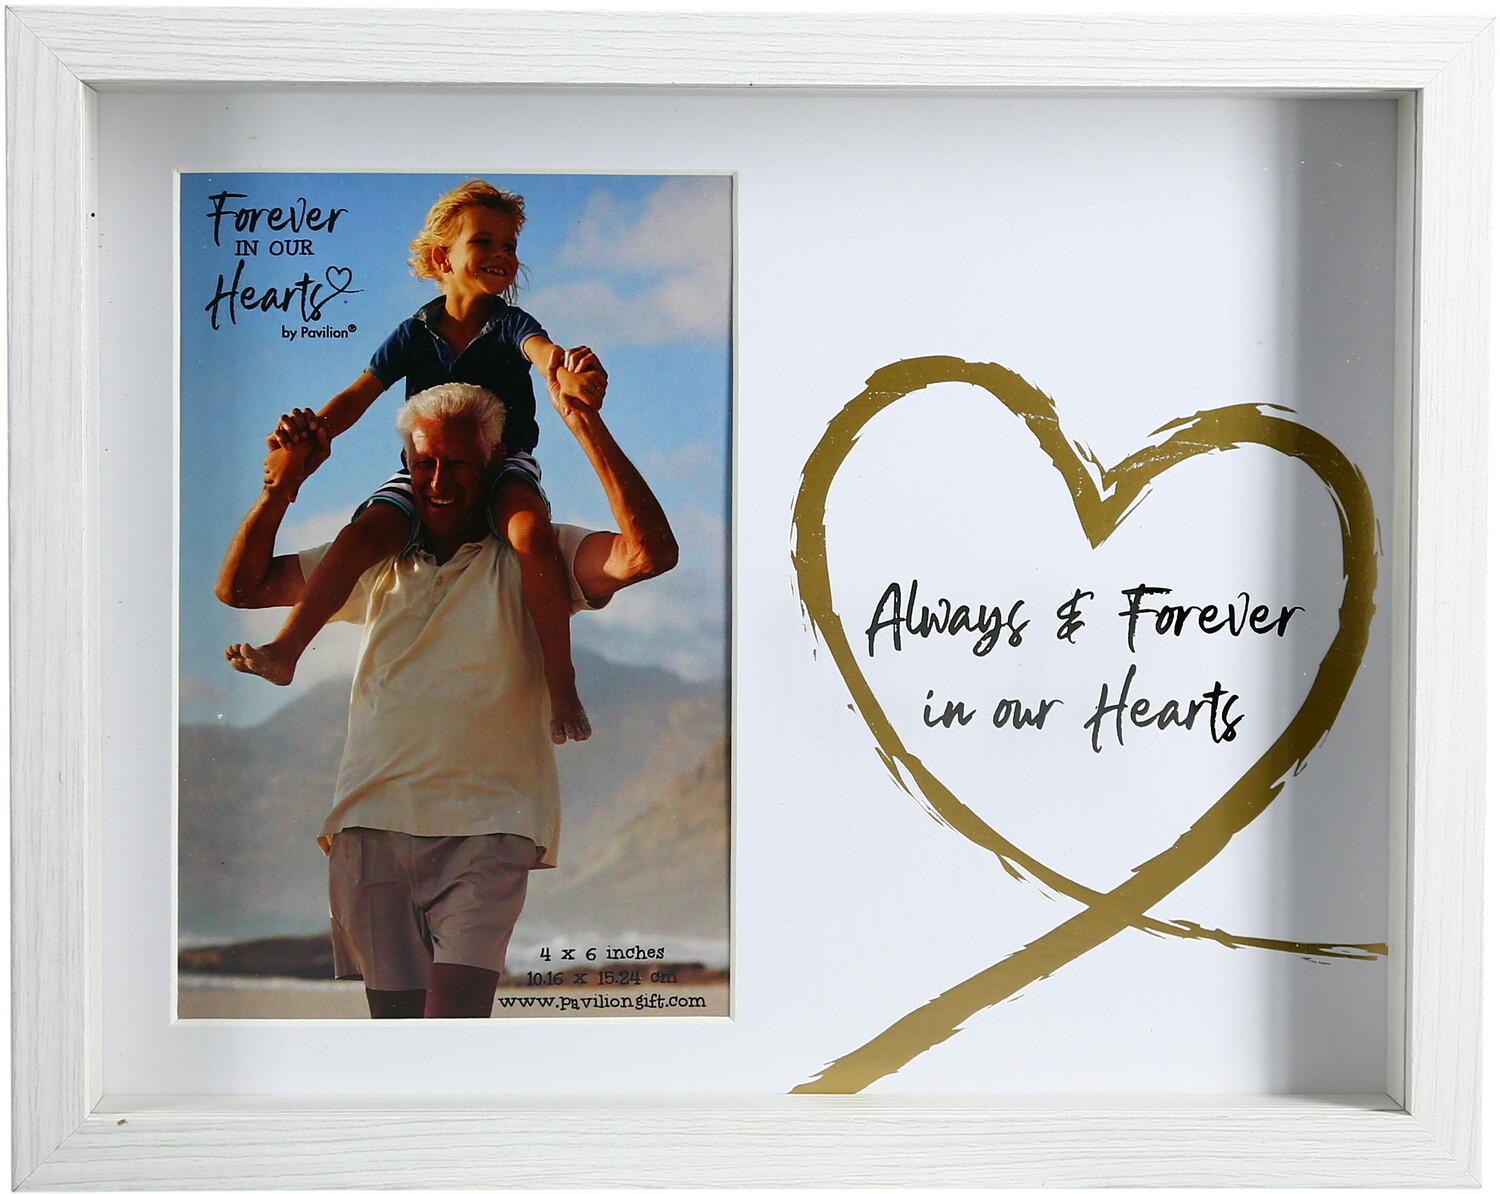 Hearts by Forever in our Hearts - Hearts - 9.5" x 7.5" Shadow Box Frame
(Holds 4" x 6" Photo)